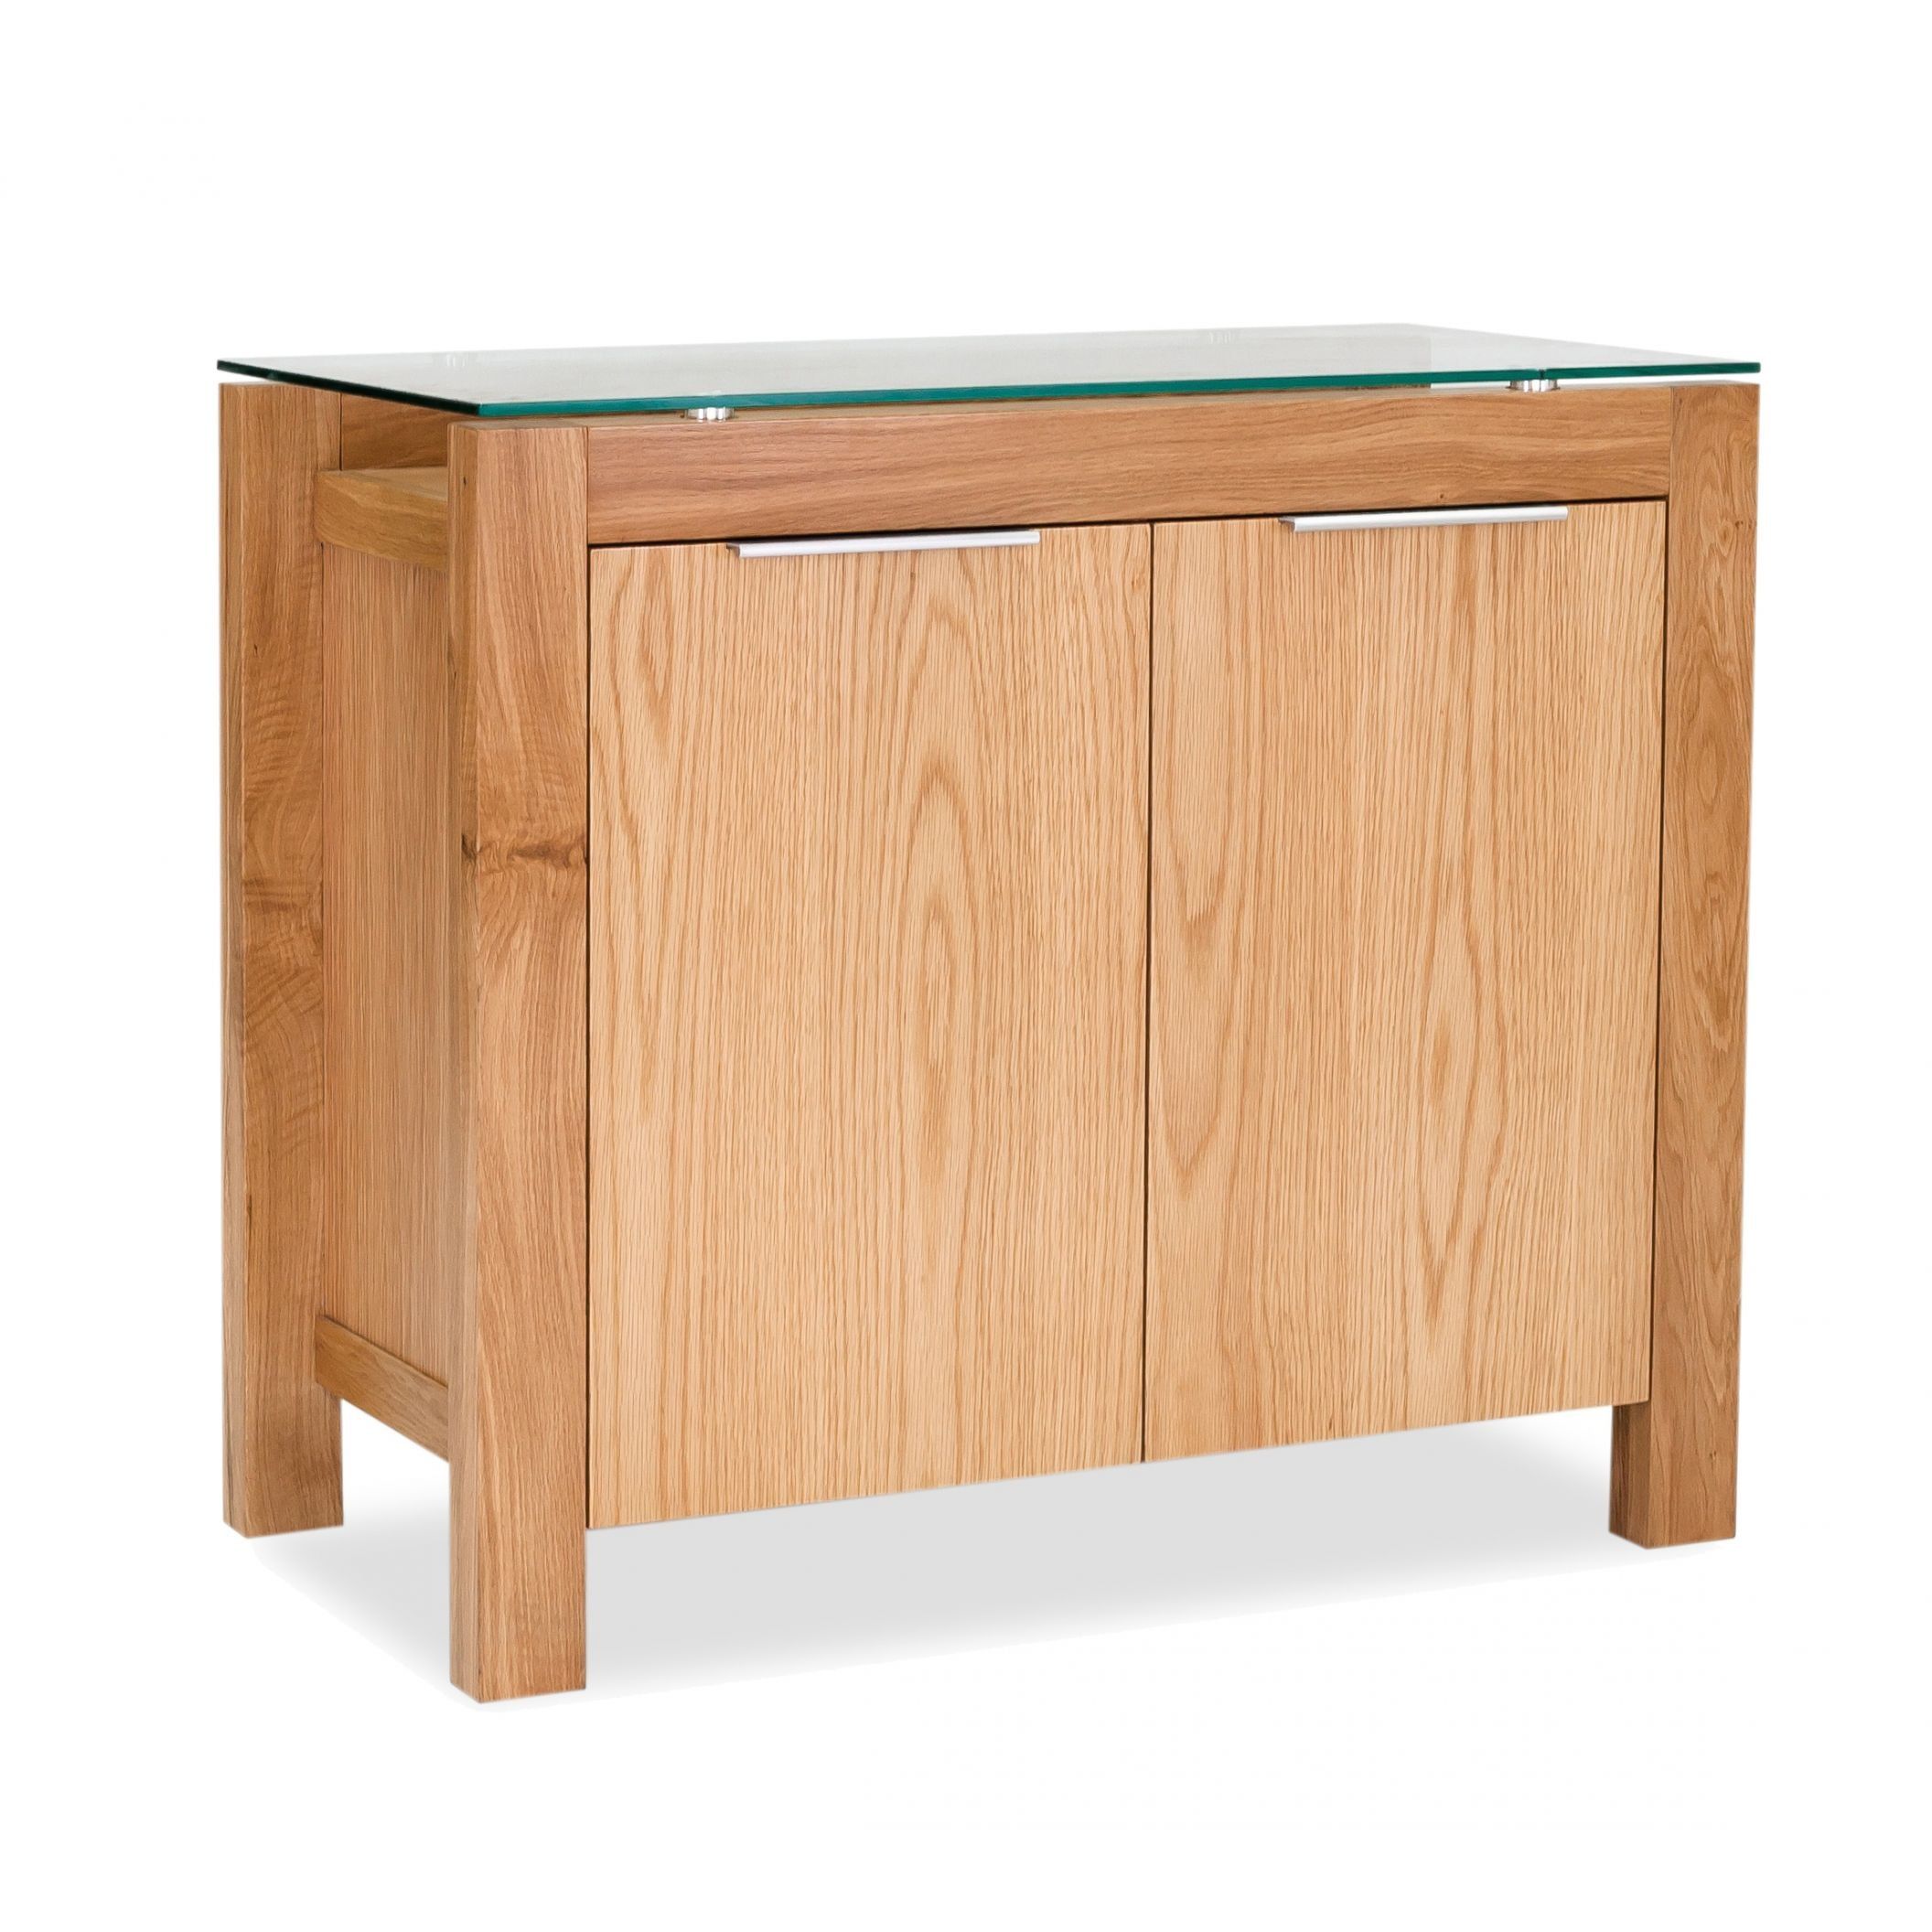 Tribeca Oak Sideboard With Regard To Tribeca Sideboards (View 5 of 30)